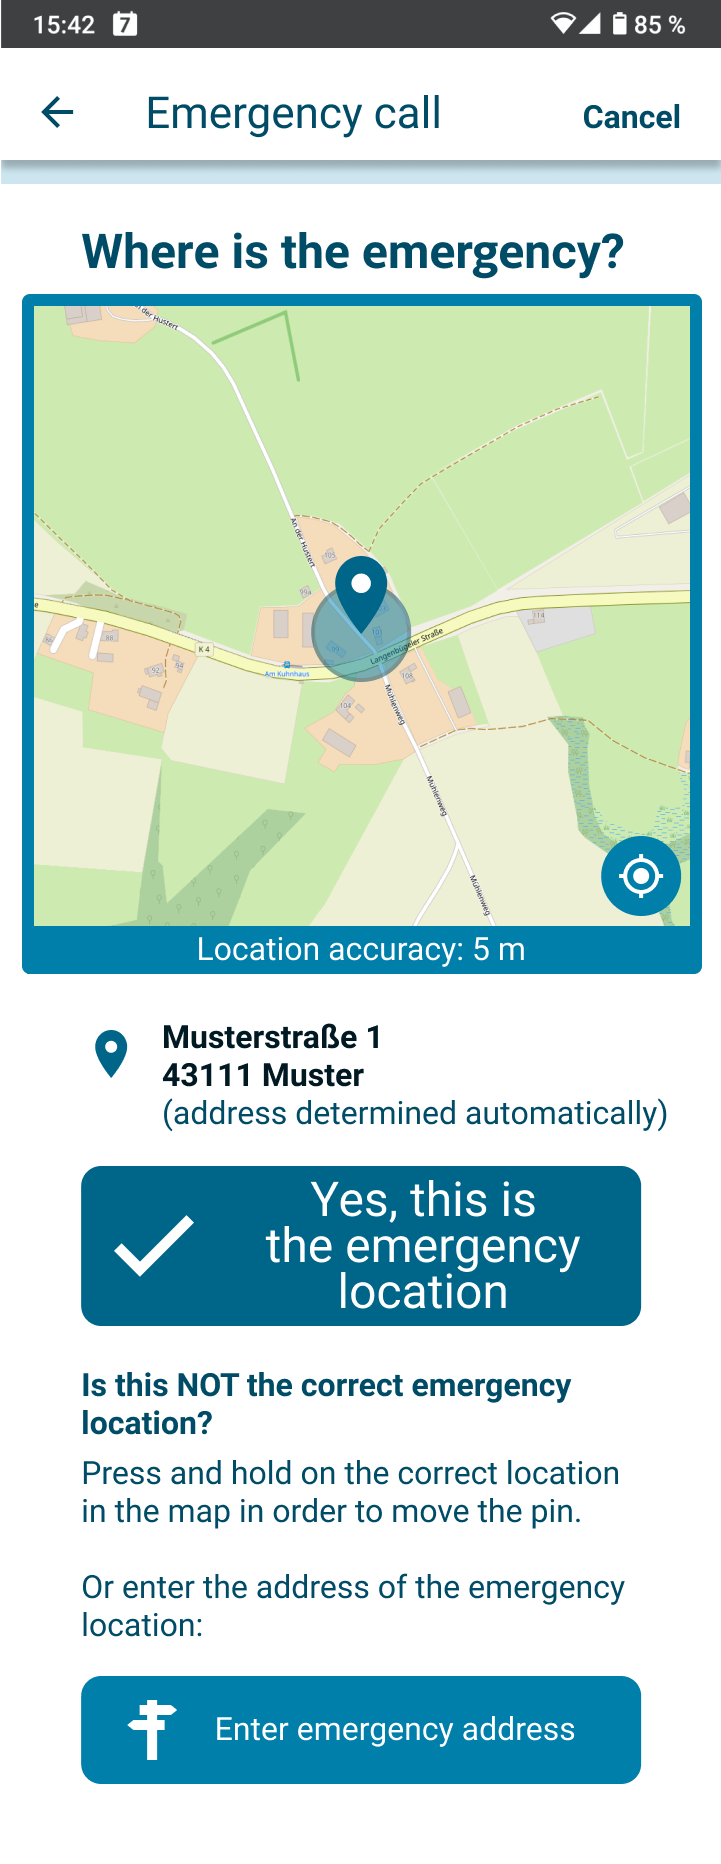 App screen with map and address of your emergency location as detected by your mobile device